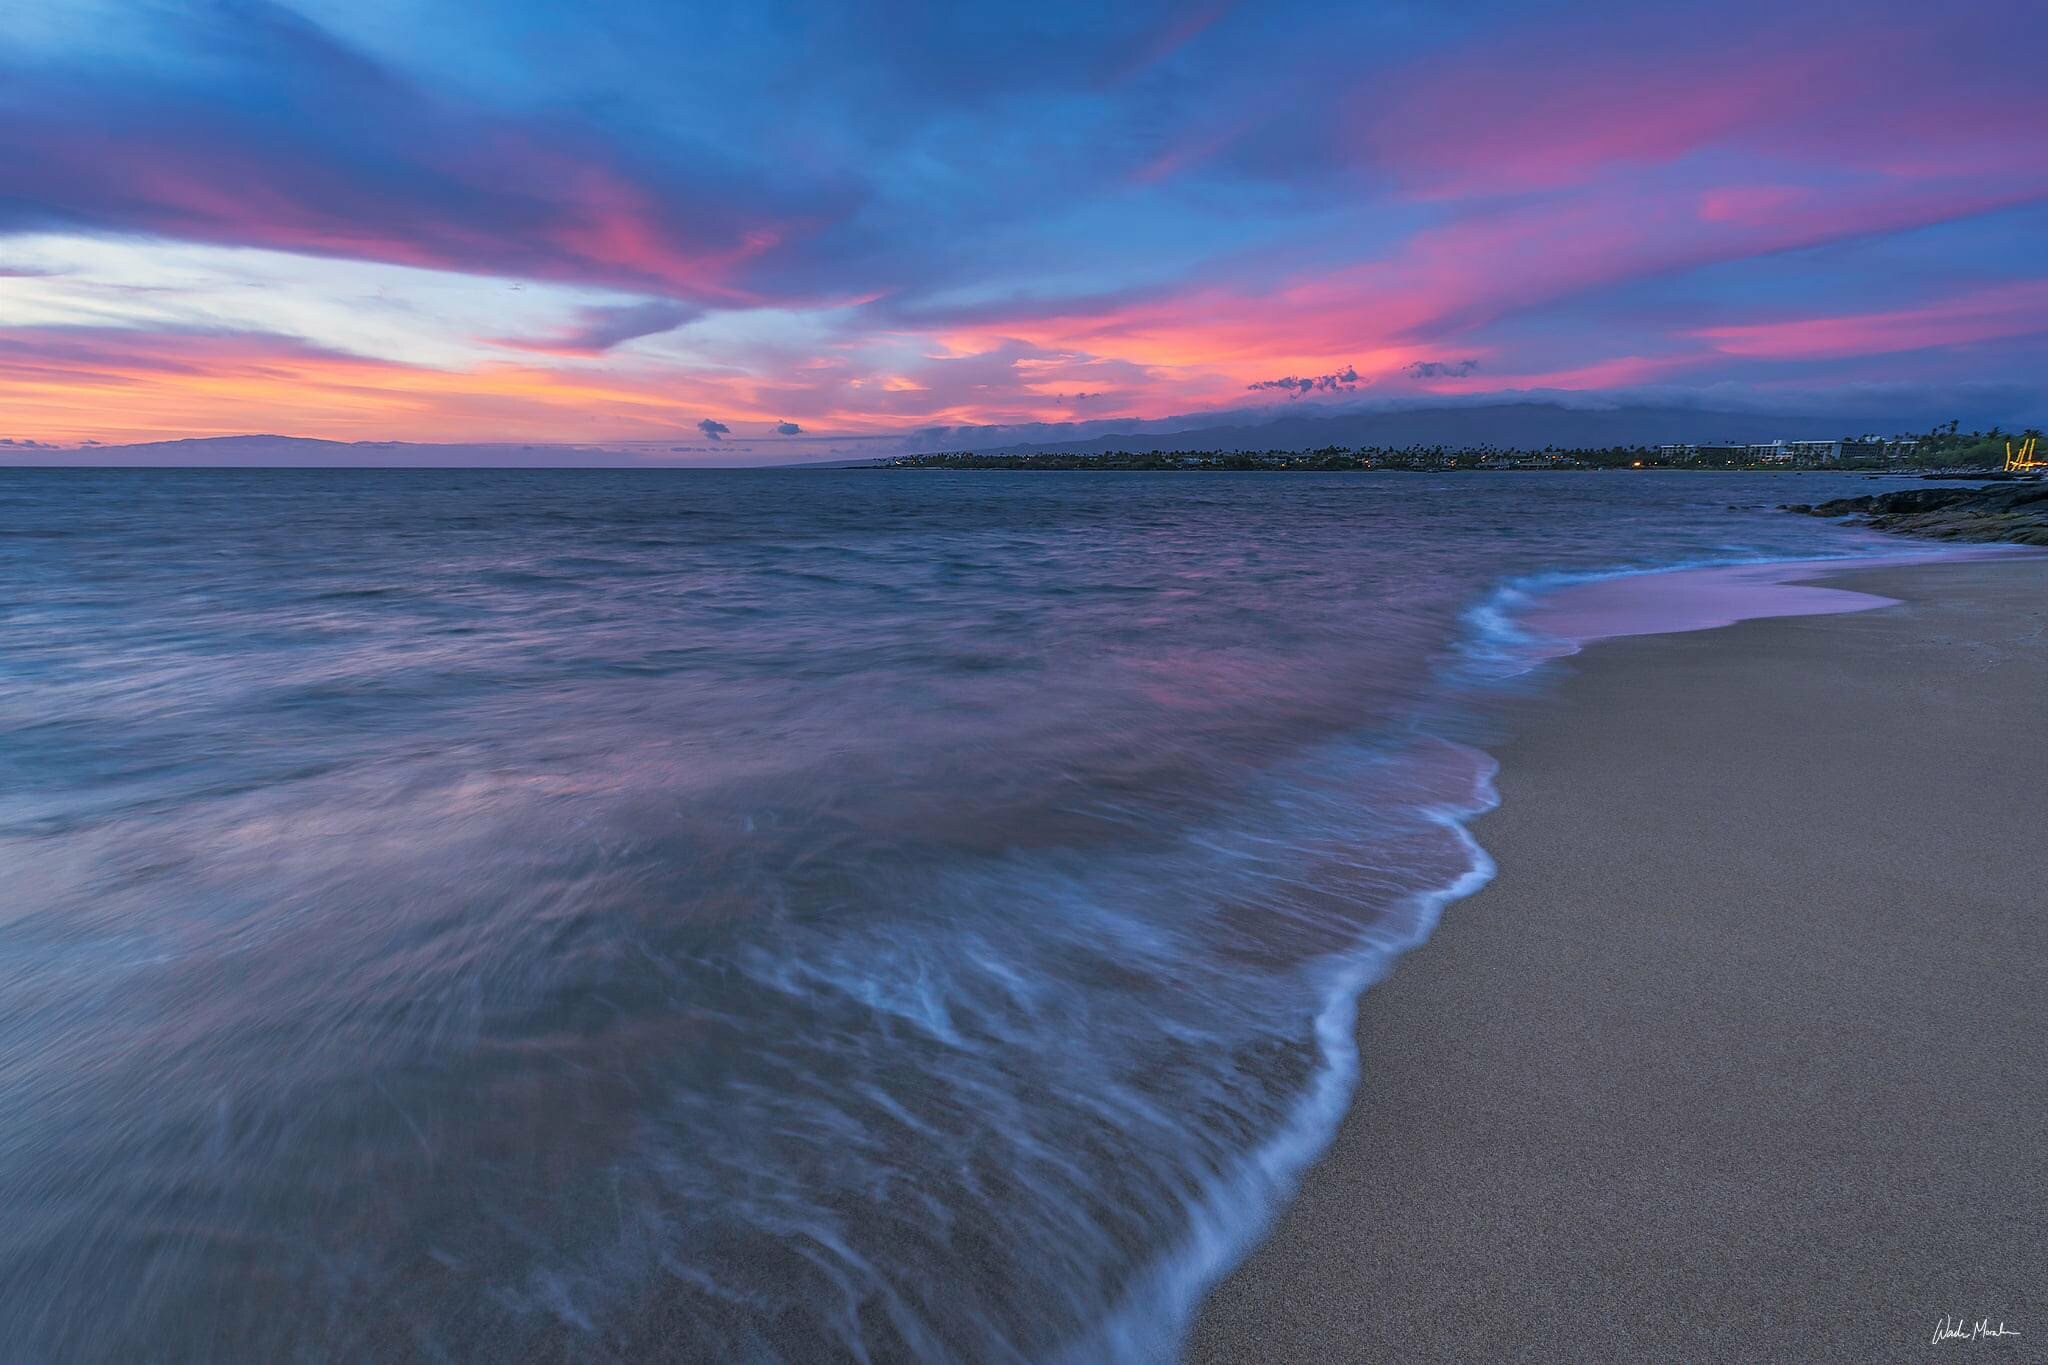 A beautiful blue and pink sunset on a beach in hawaii